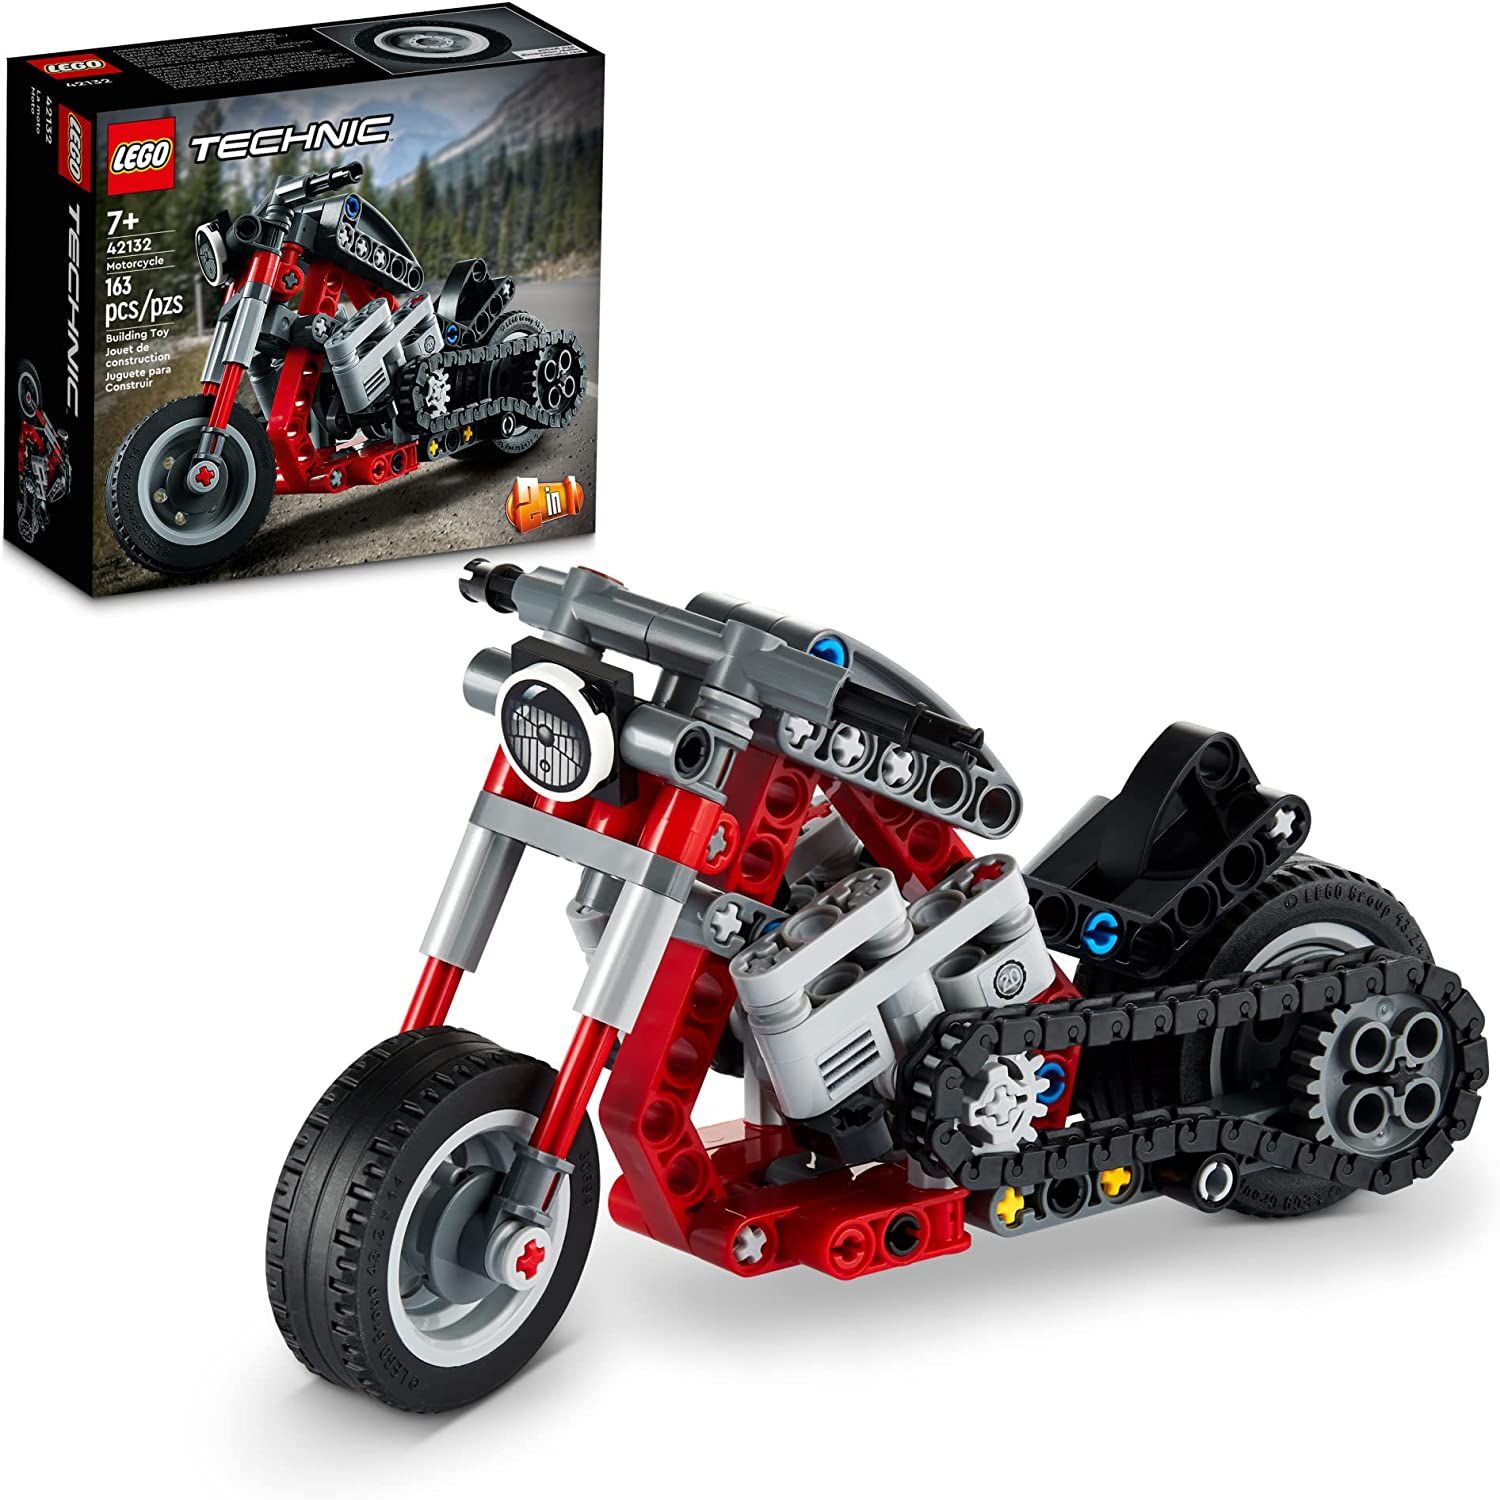 LEGO Technic Motorcycle 42132 Building Toy Set for Kids (163 Pieces) 1